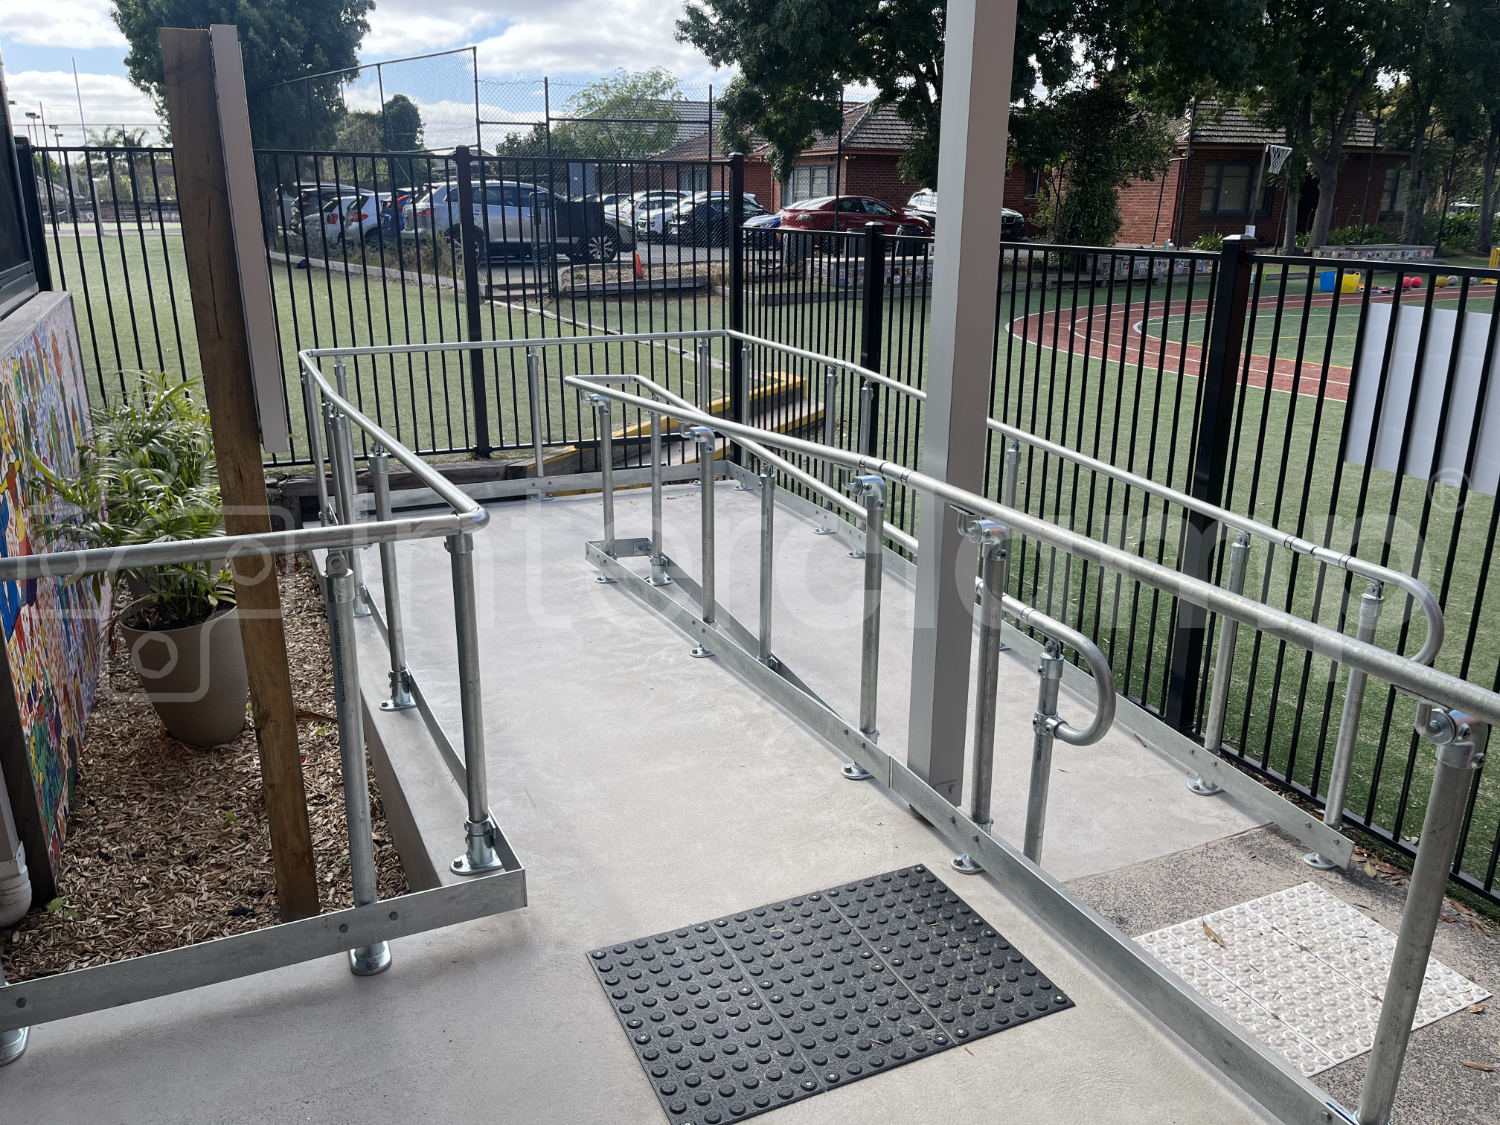 Interclamp DDA Assist key clamp handrail installed on an access ramp for a primary school